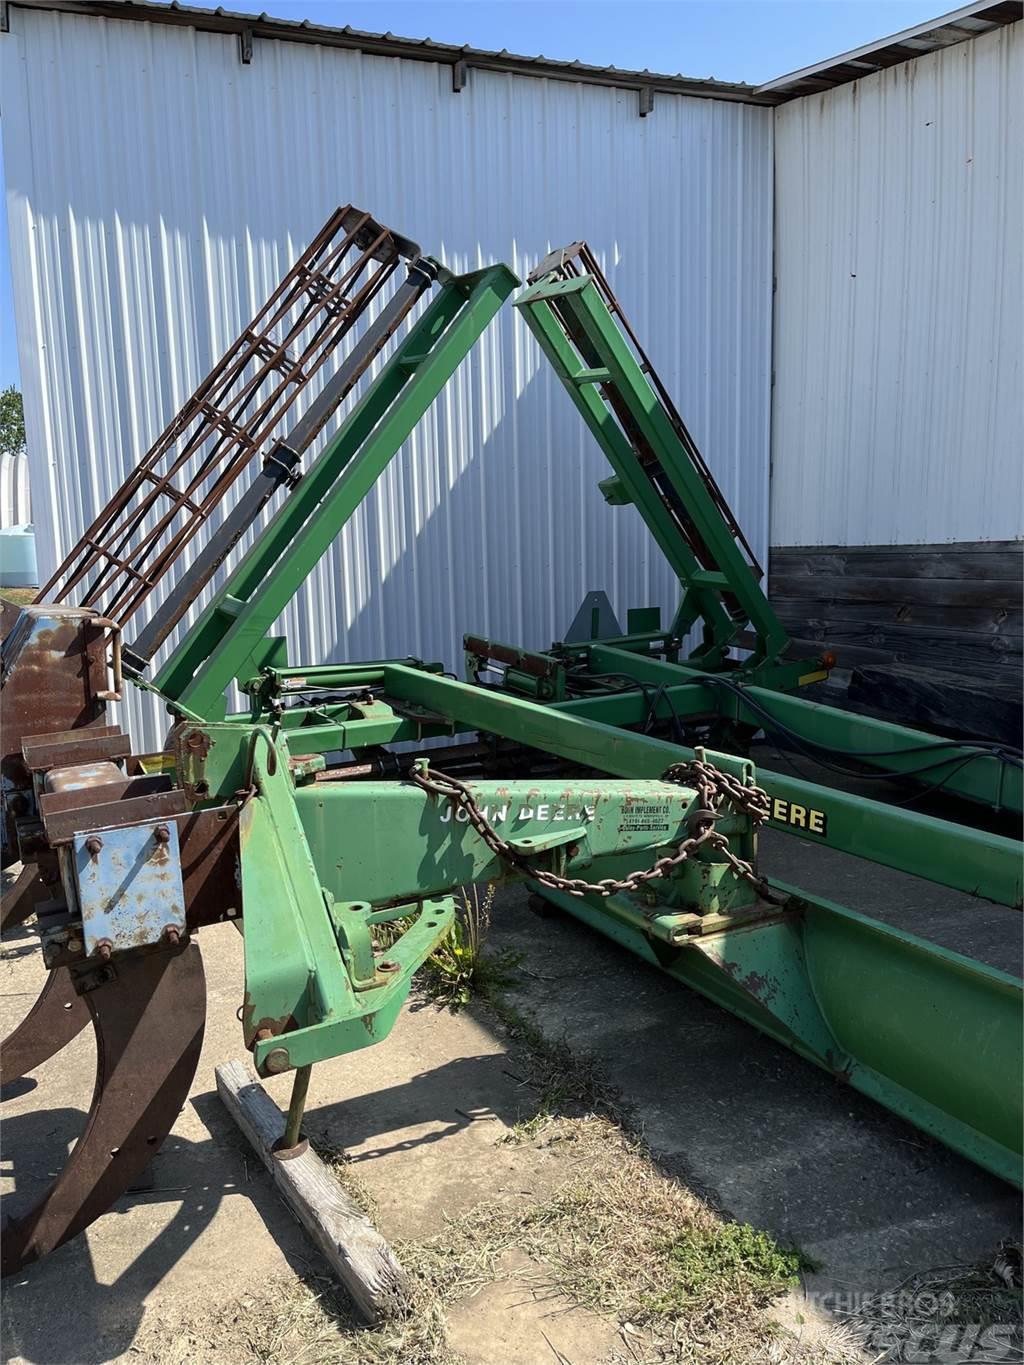 John Deere 200 Other sowing machines and accessories